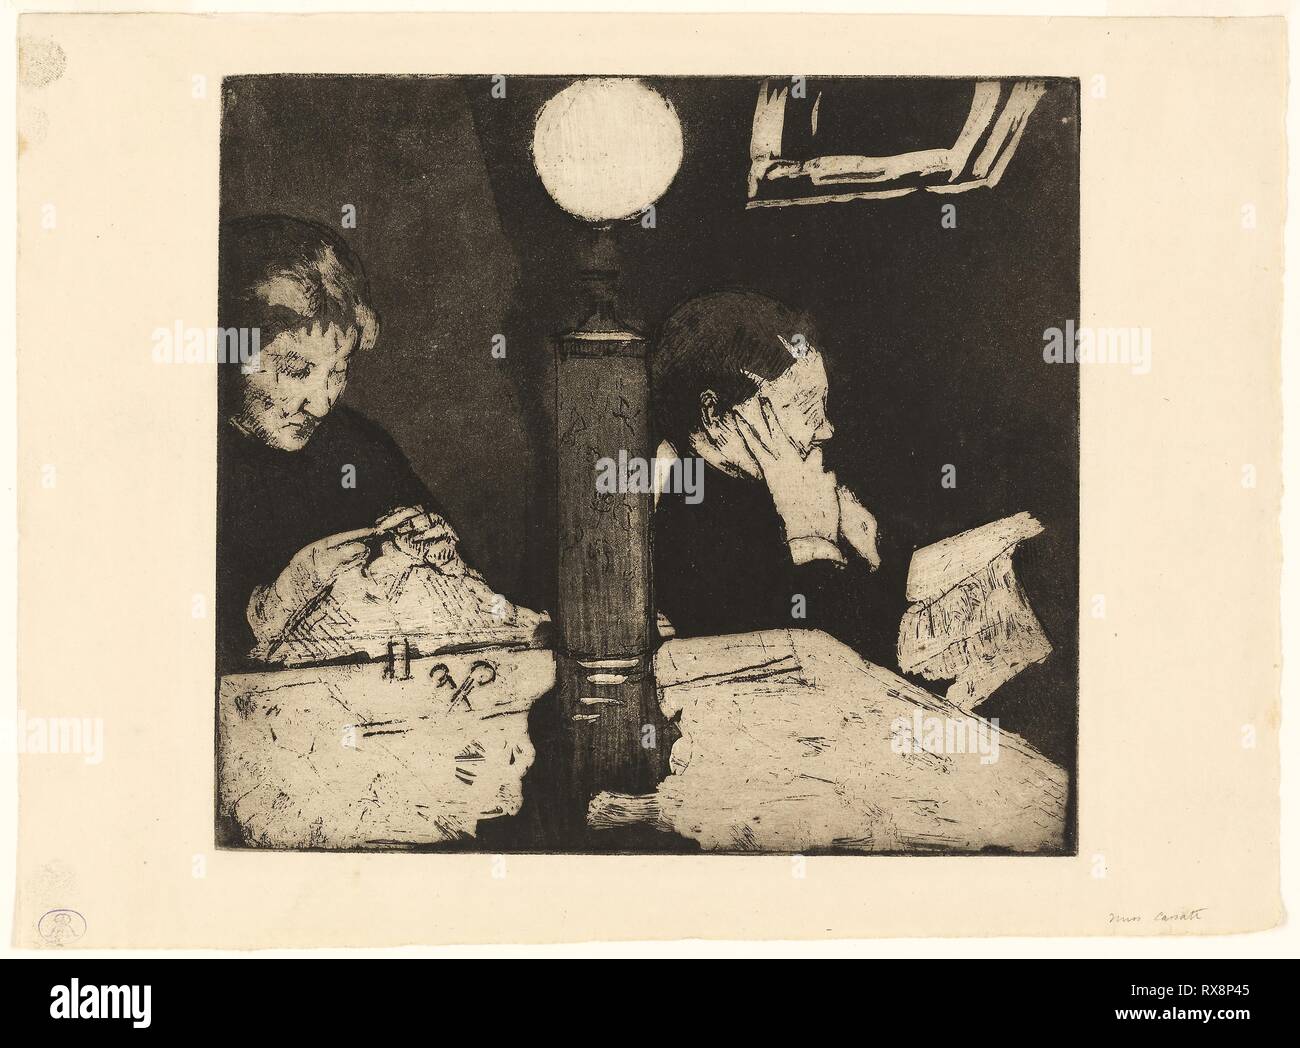 Under the Lamp. Mary Cassatt; American, 1844-1926. Date: 1882. Dimensions: 192 x 218 mm (image/plate); 237 x 321 mm (sheet). Soft ground etching and aquatint in black on cream wove paper. Origin: United States. Museum: The Chicago Art Institute. Stock Photo